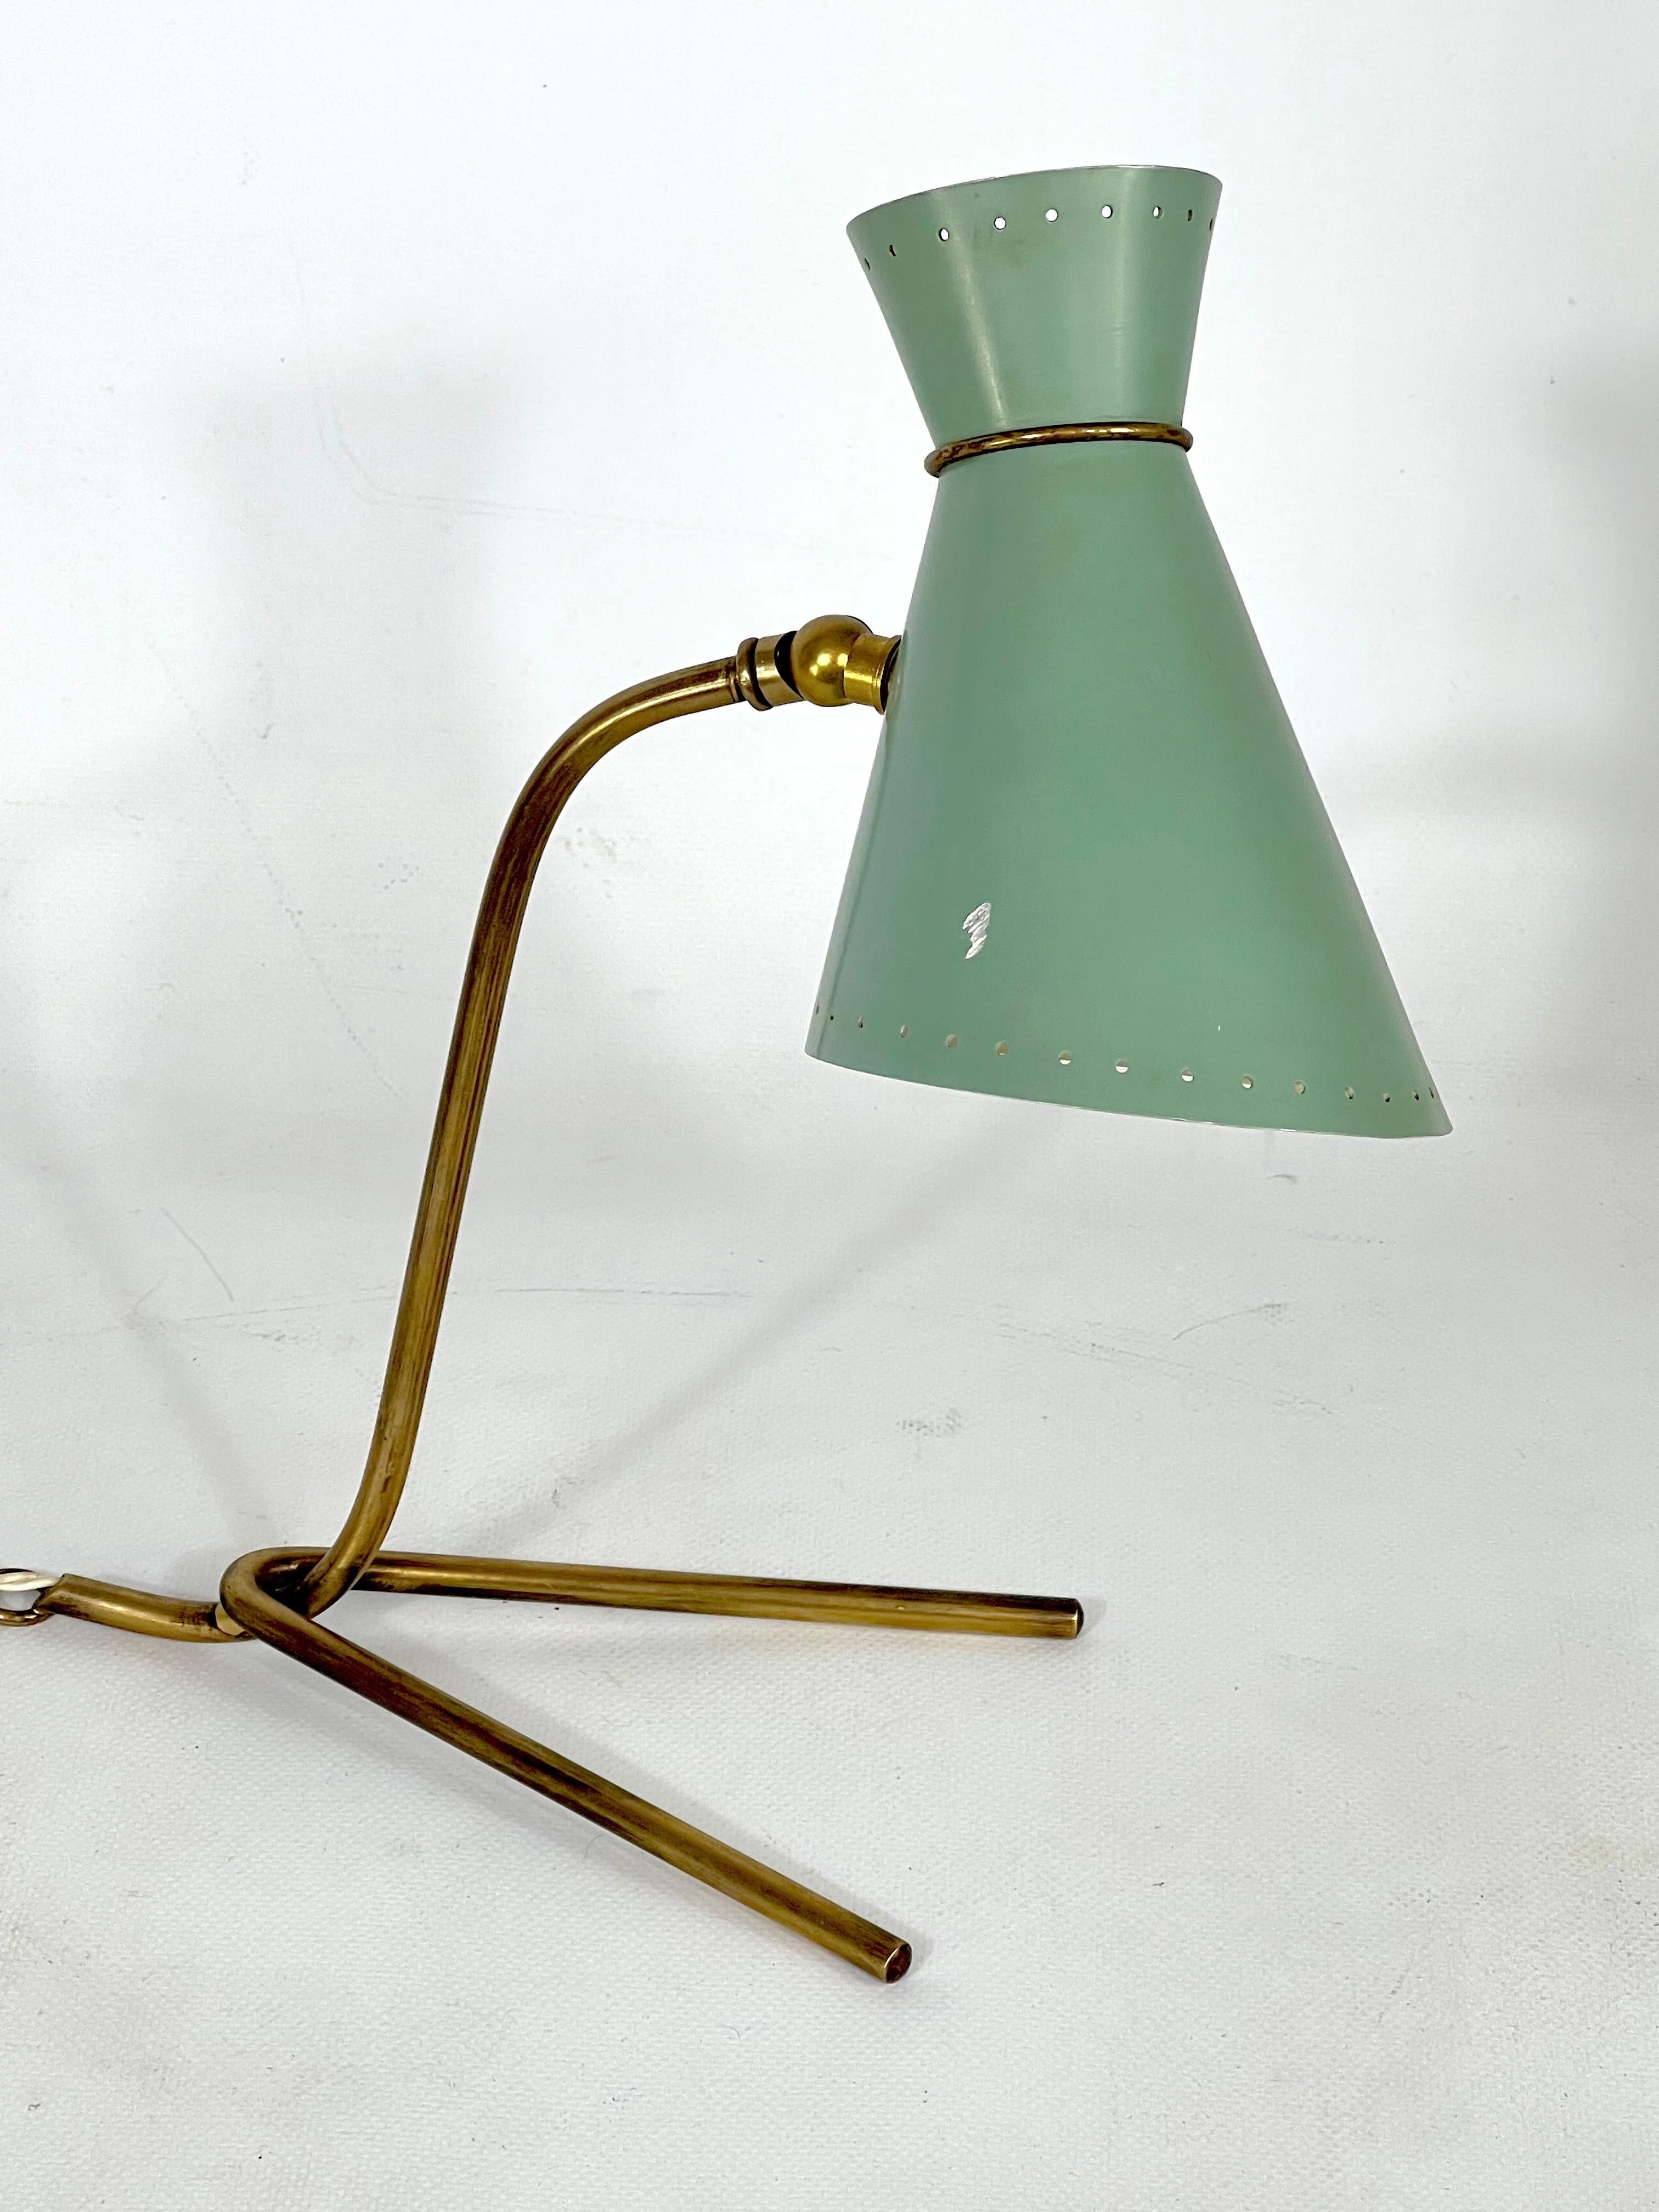 Vintage unaltered condition with normal trace of age and use for this Italian table lamp made from brass and lacquered aluminum. Produced in Italy during the 50s by Stilnovo Milano, it can be used both as a table or a wall lamp. Full working with EU